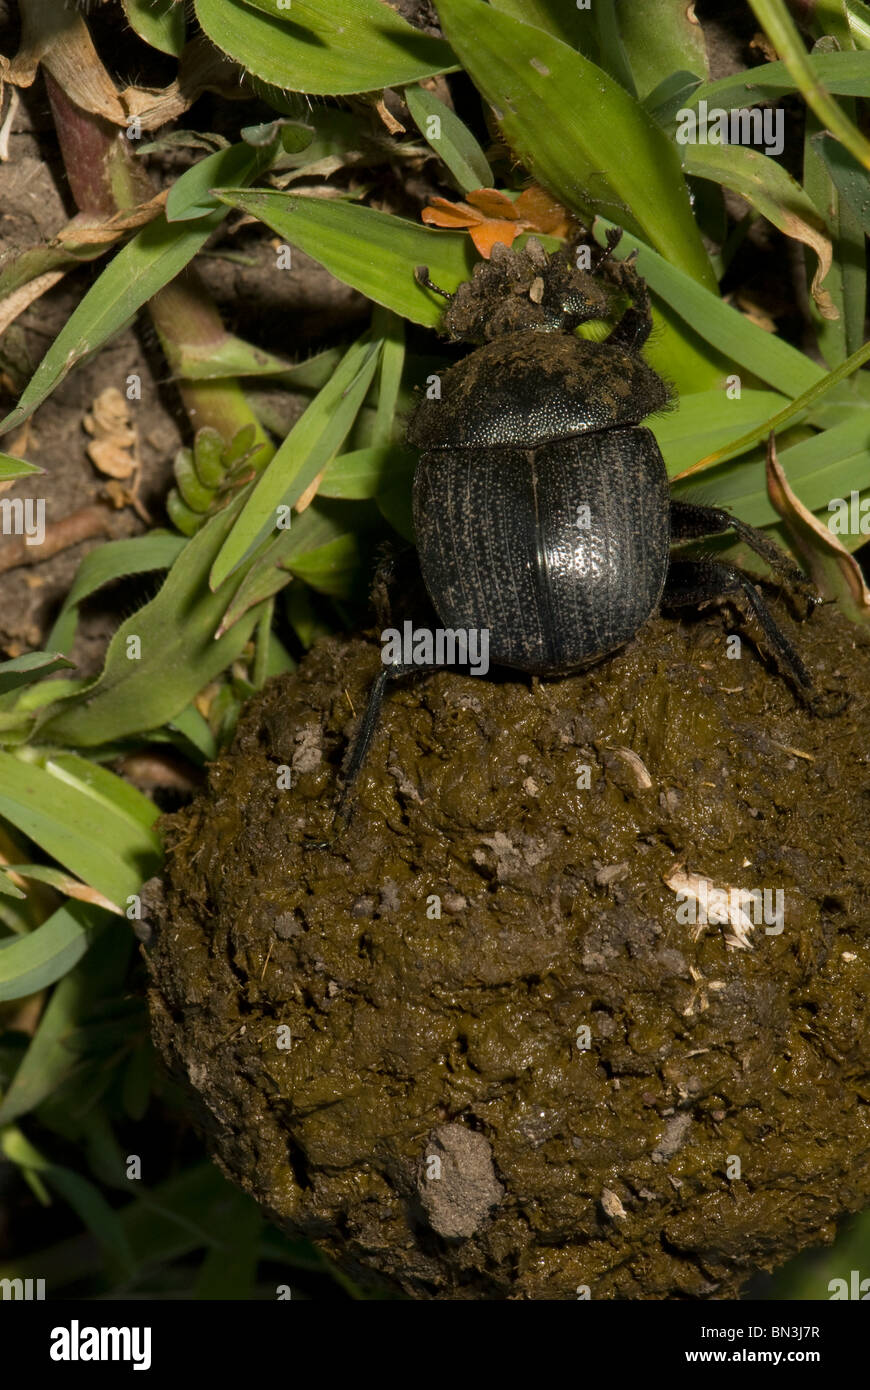 Dung beetle photographed in Tanzania, Africa, on the Serengeti Plains, Dung beetle rolling a ball of dung Stock Photo